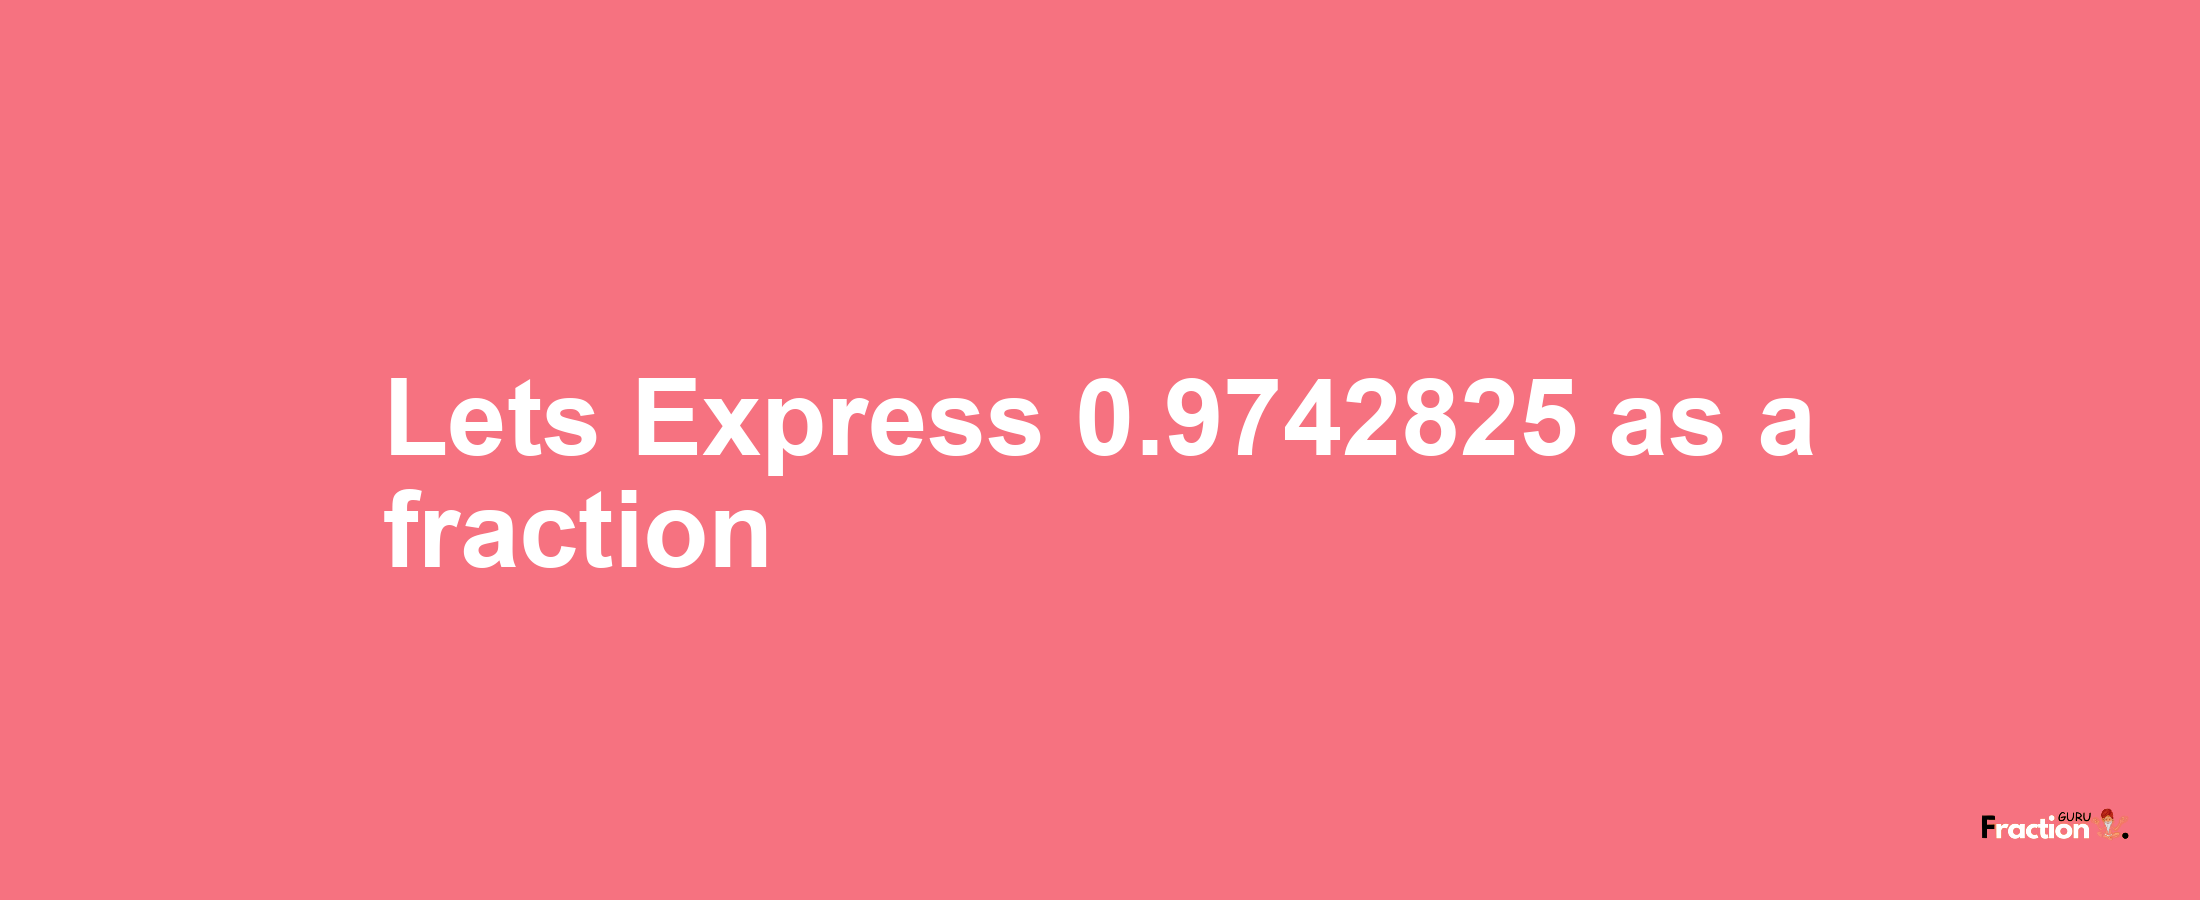 Lets Express 0.9742825 as afraction